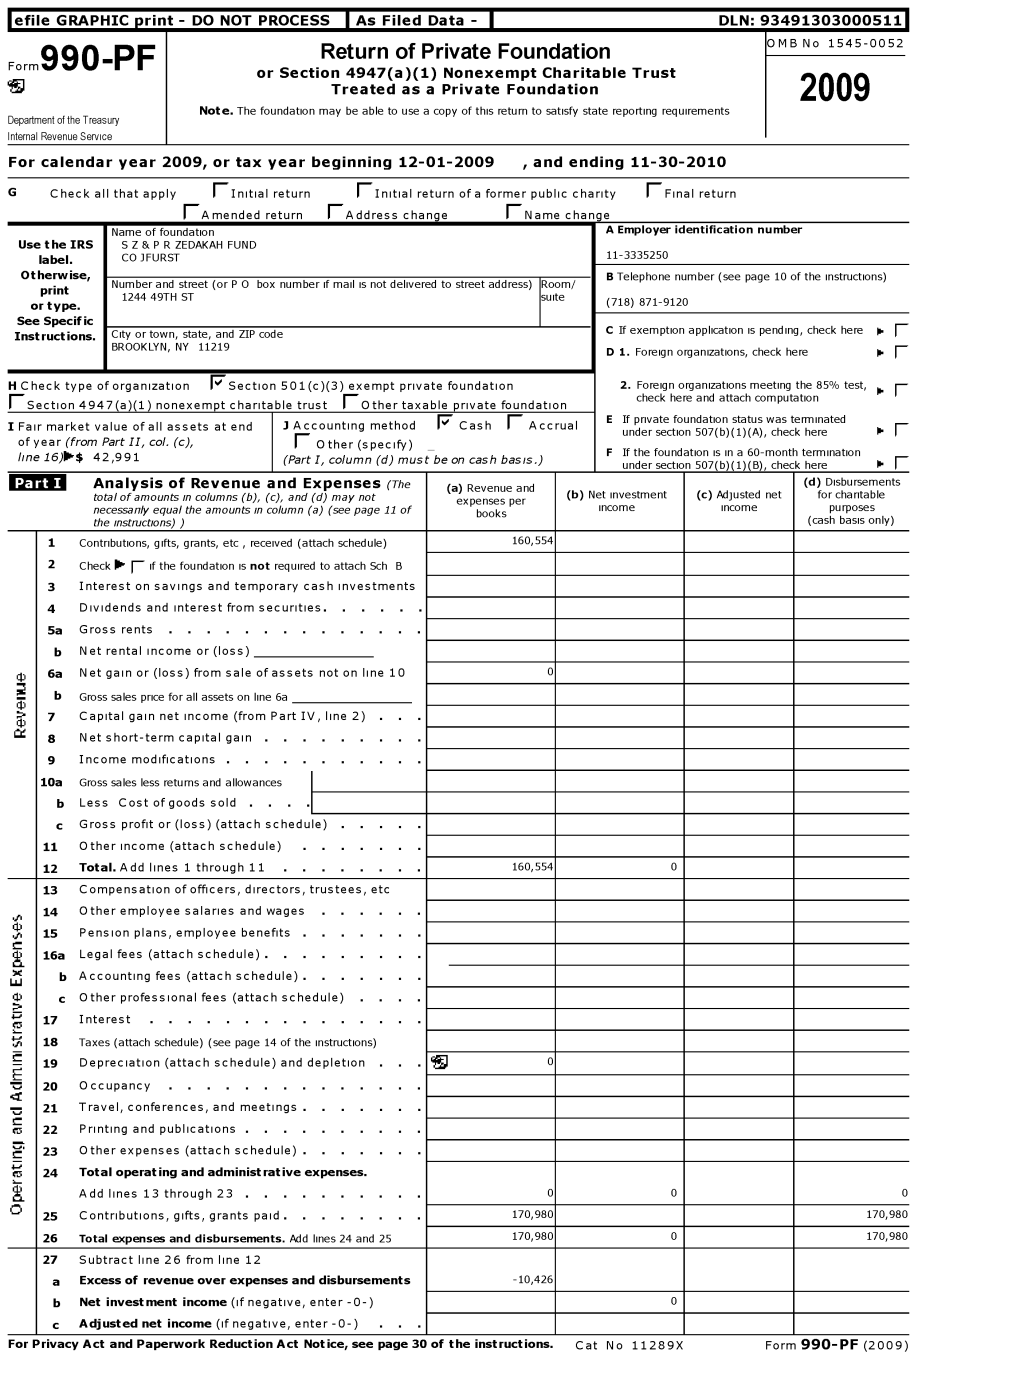 Return of Private Foundation OMB No 1545-0052 Form 990 -PF Or Section 4947(A)(1) Nonexempt Charitable Trust ` Treated As a Private Foundation 2009 Note